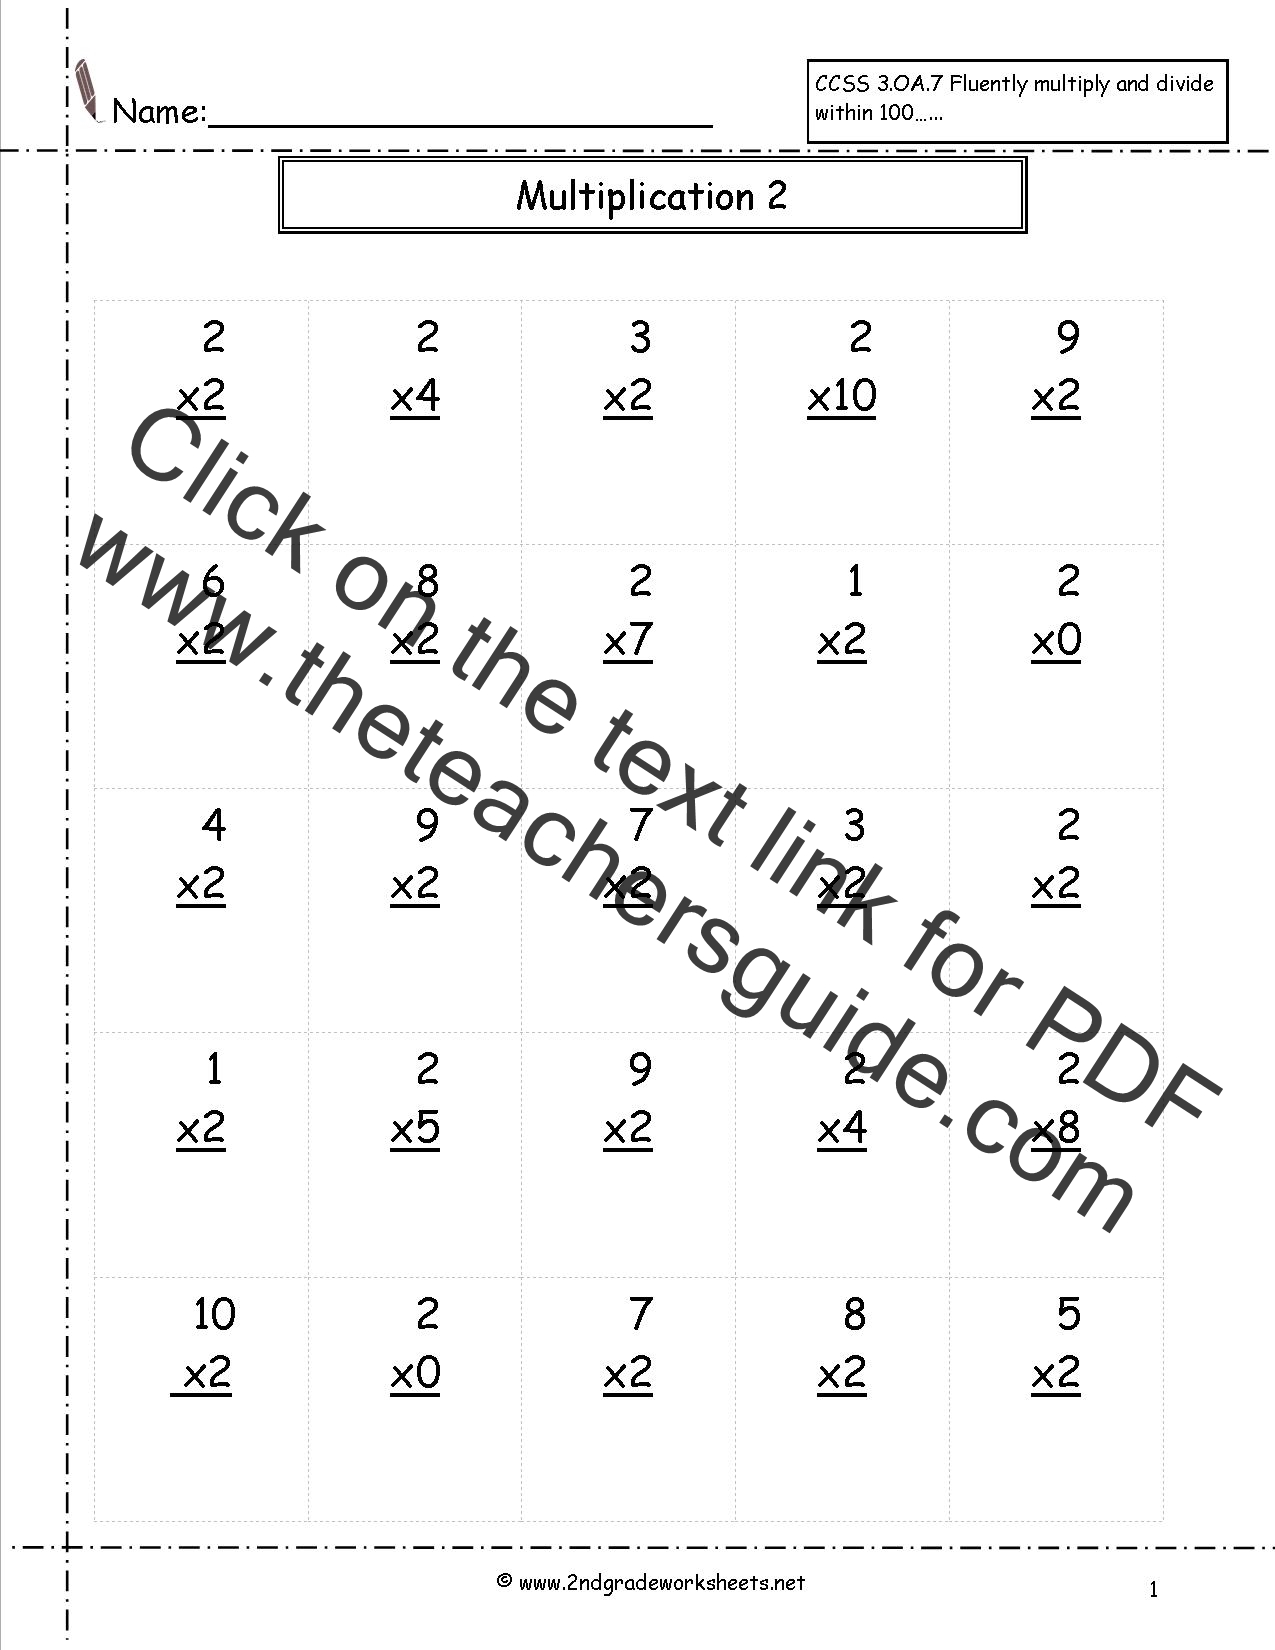  Multiplication Worksheets And Printouts